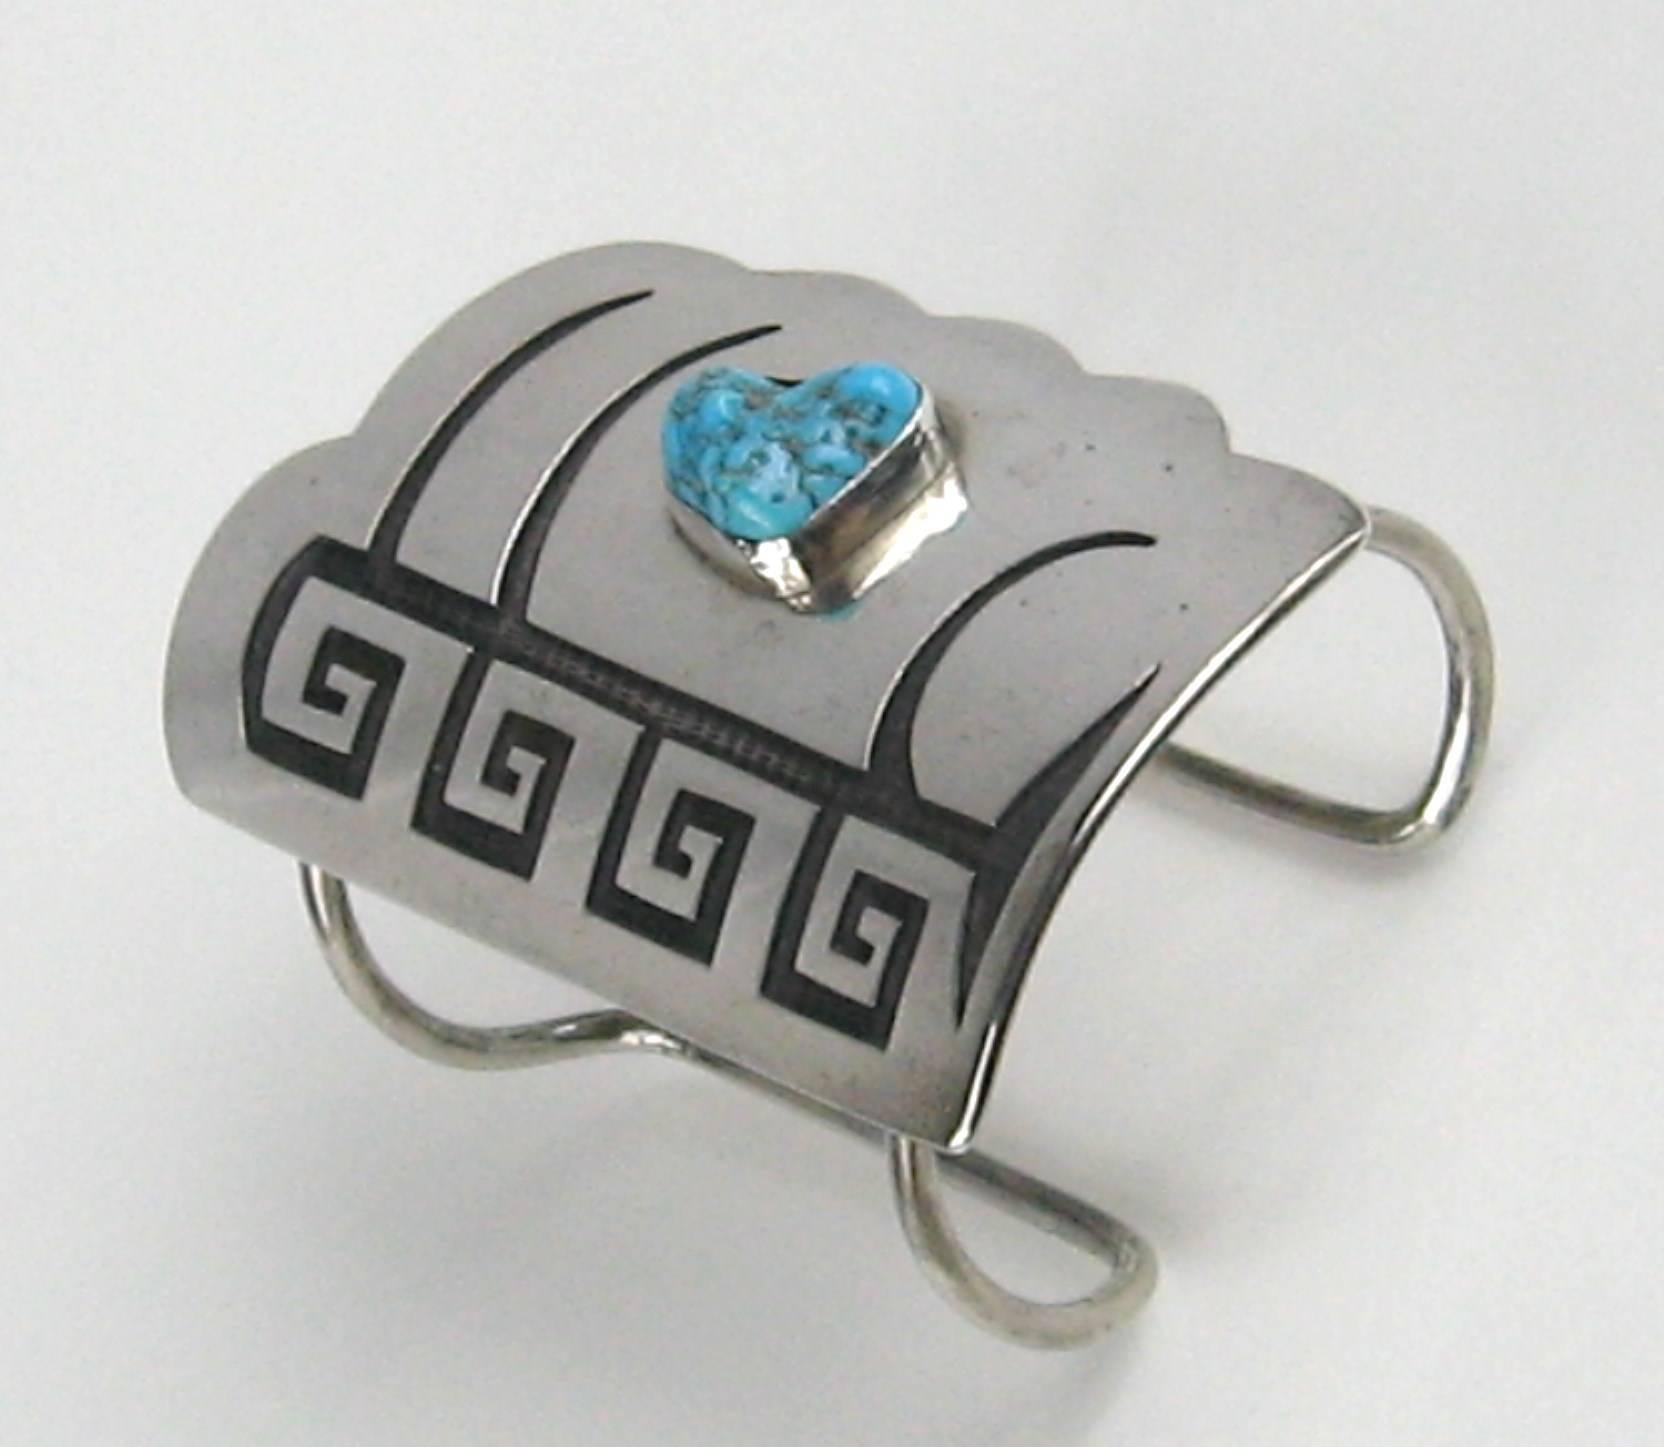 This is a Stunning early Hopi Cuff Bracelet. It is Hallmarked inside cuff. Large Turquoise stone. Double ring cuff.  Measuring 3.50